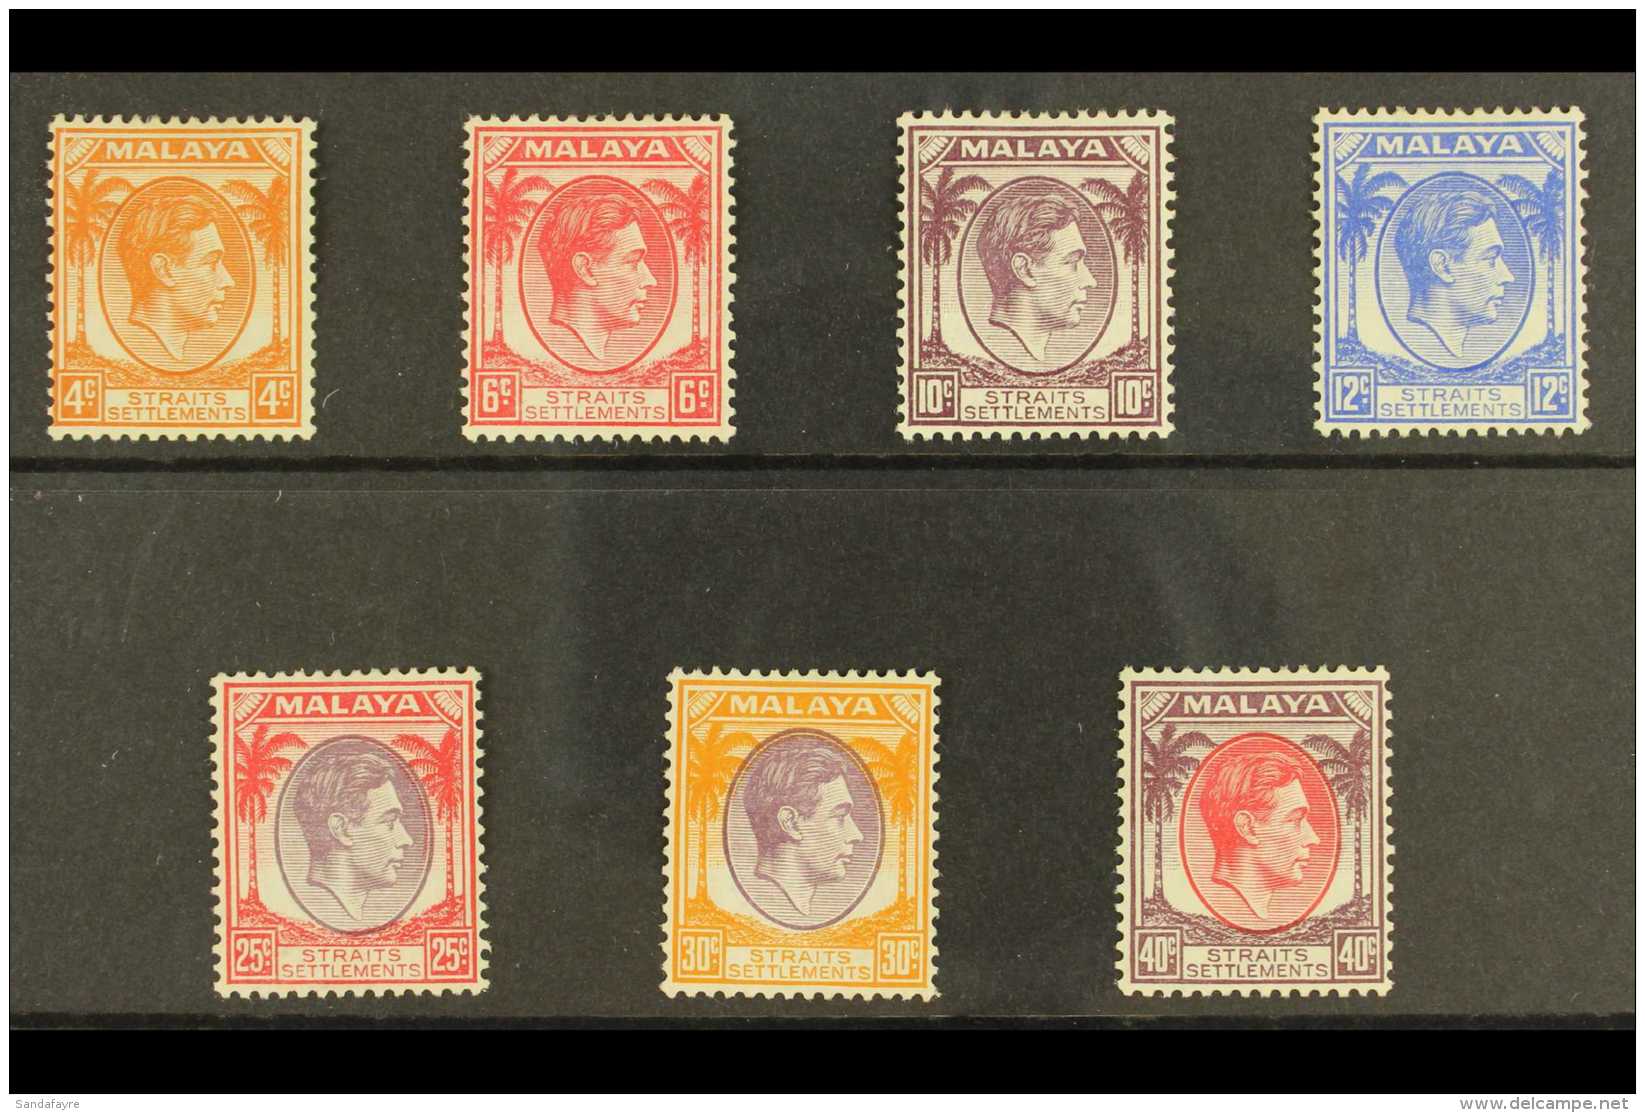 1937-41 KGVI Mint Values - 4c, 6c, 10c, 12c, 25c, 30c And 40c - Fine Mint. (7 Stamps) For More Images, Please... - Straits Settlements